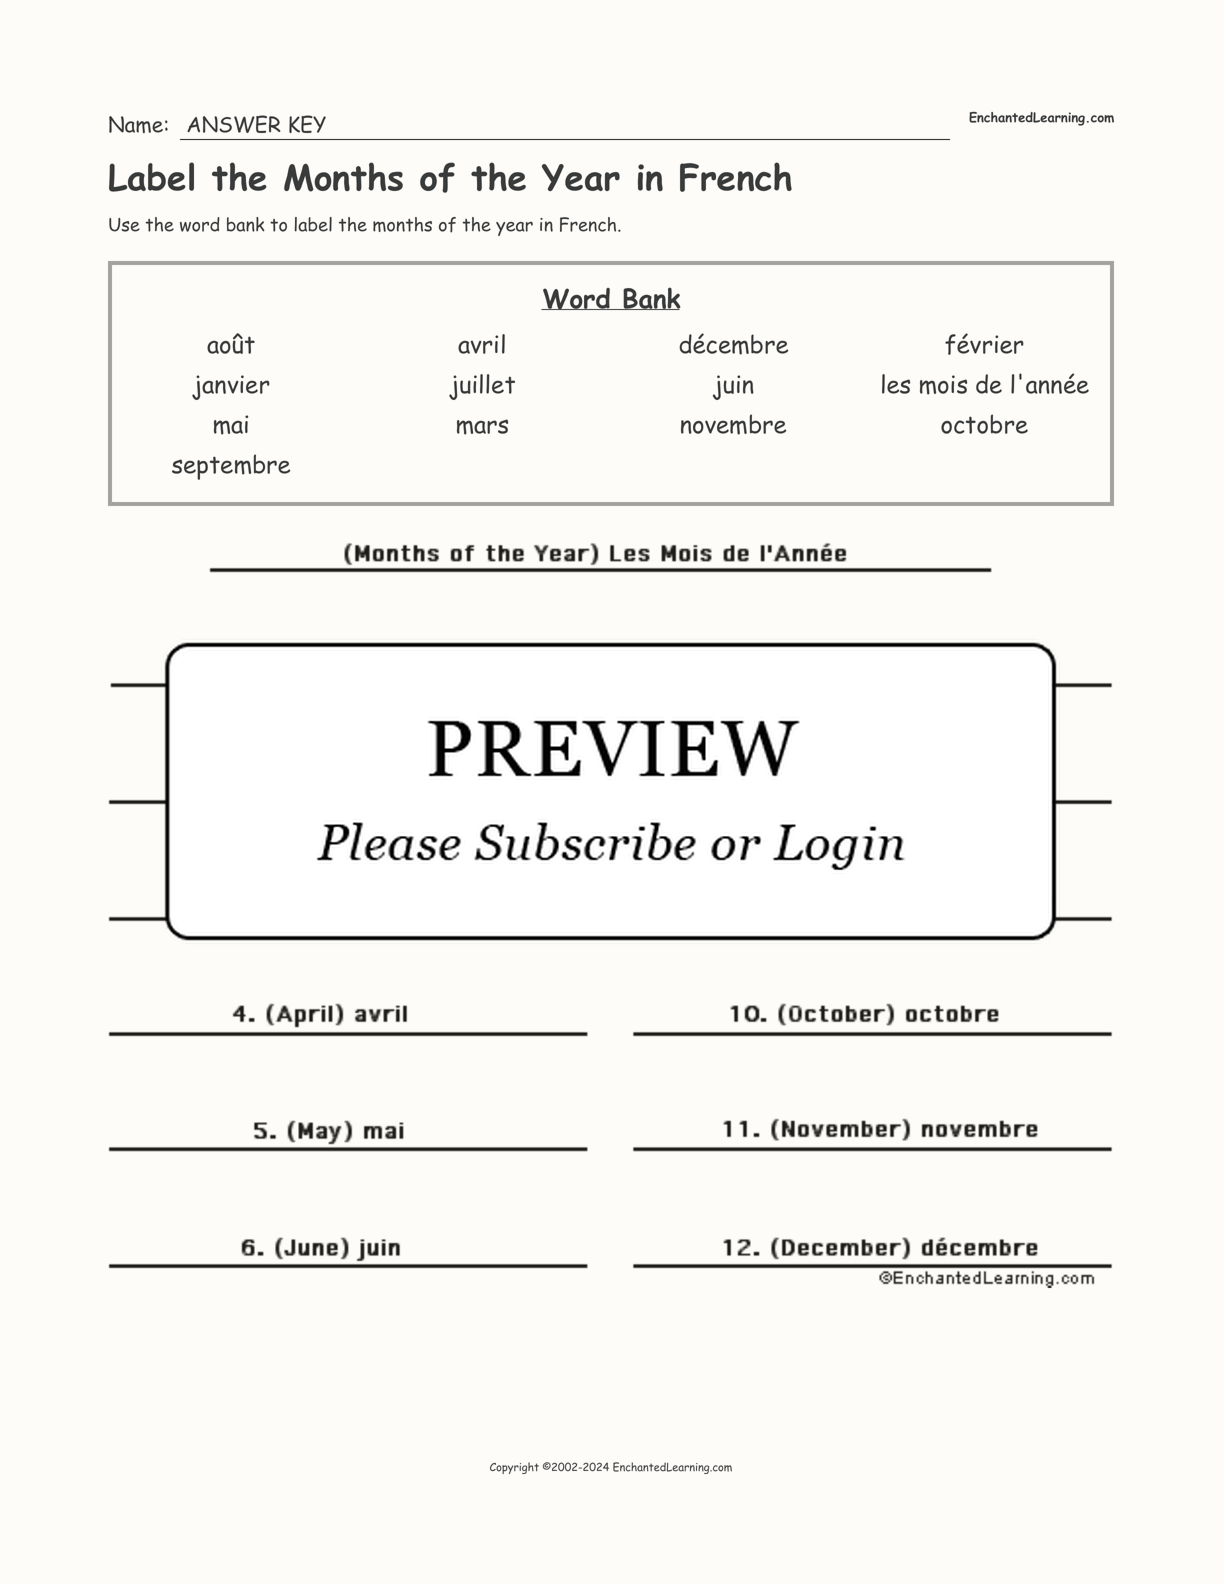 Label the Months of the Year in French interactive worksheet page 2